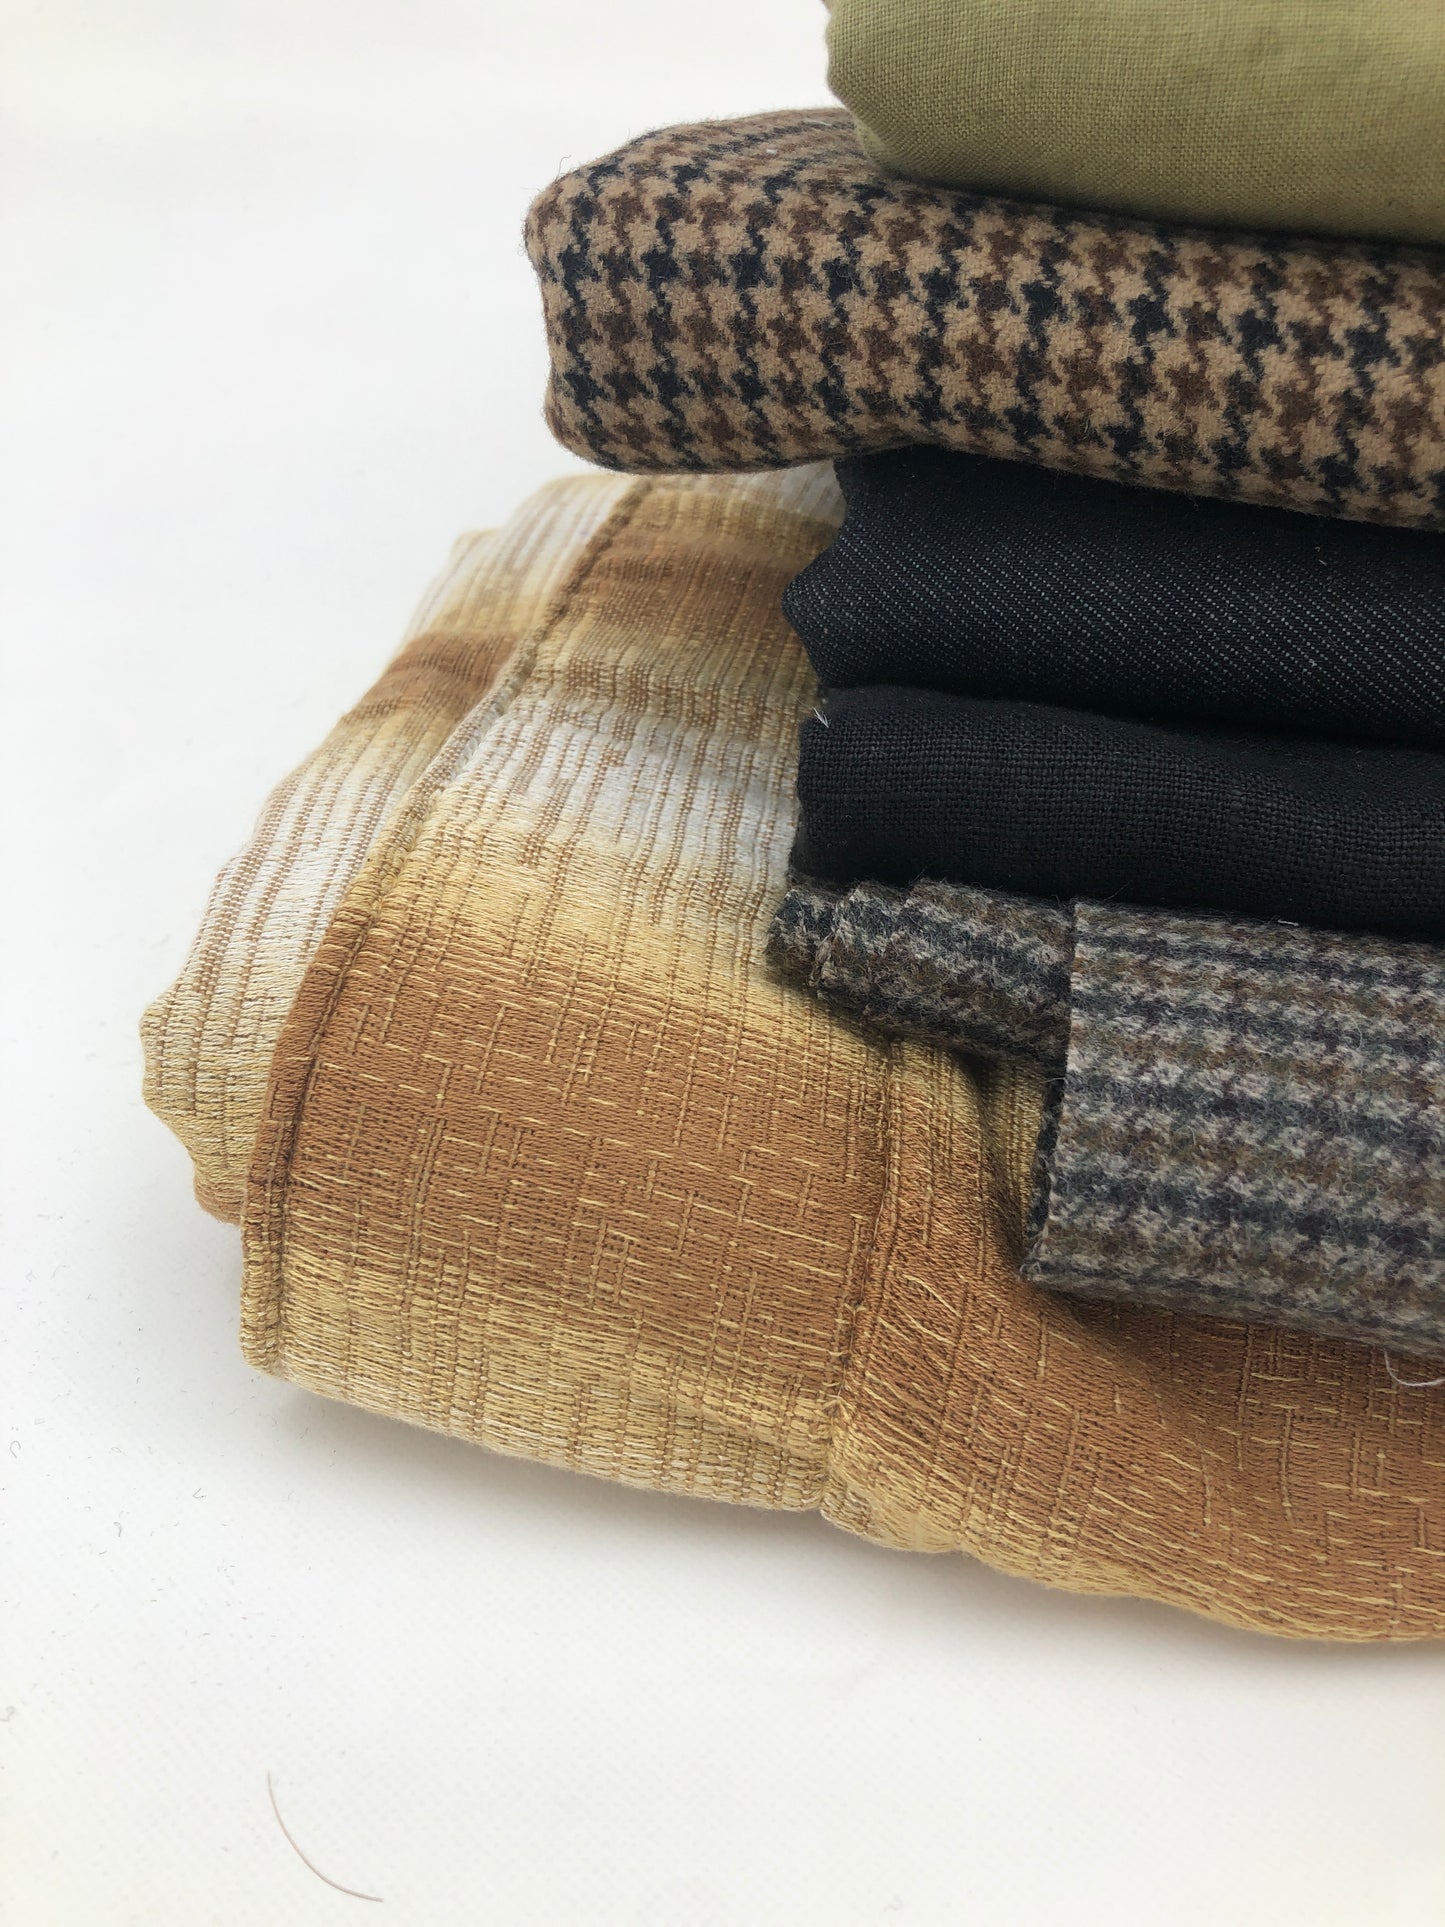 Fabric, Earthy Colours, Large Pieces